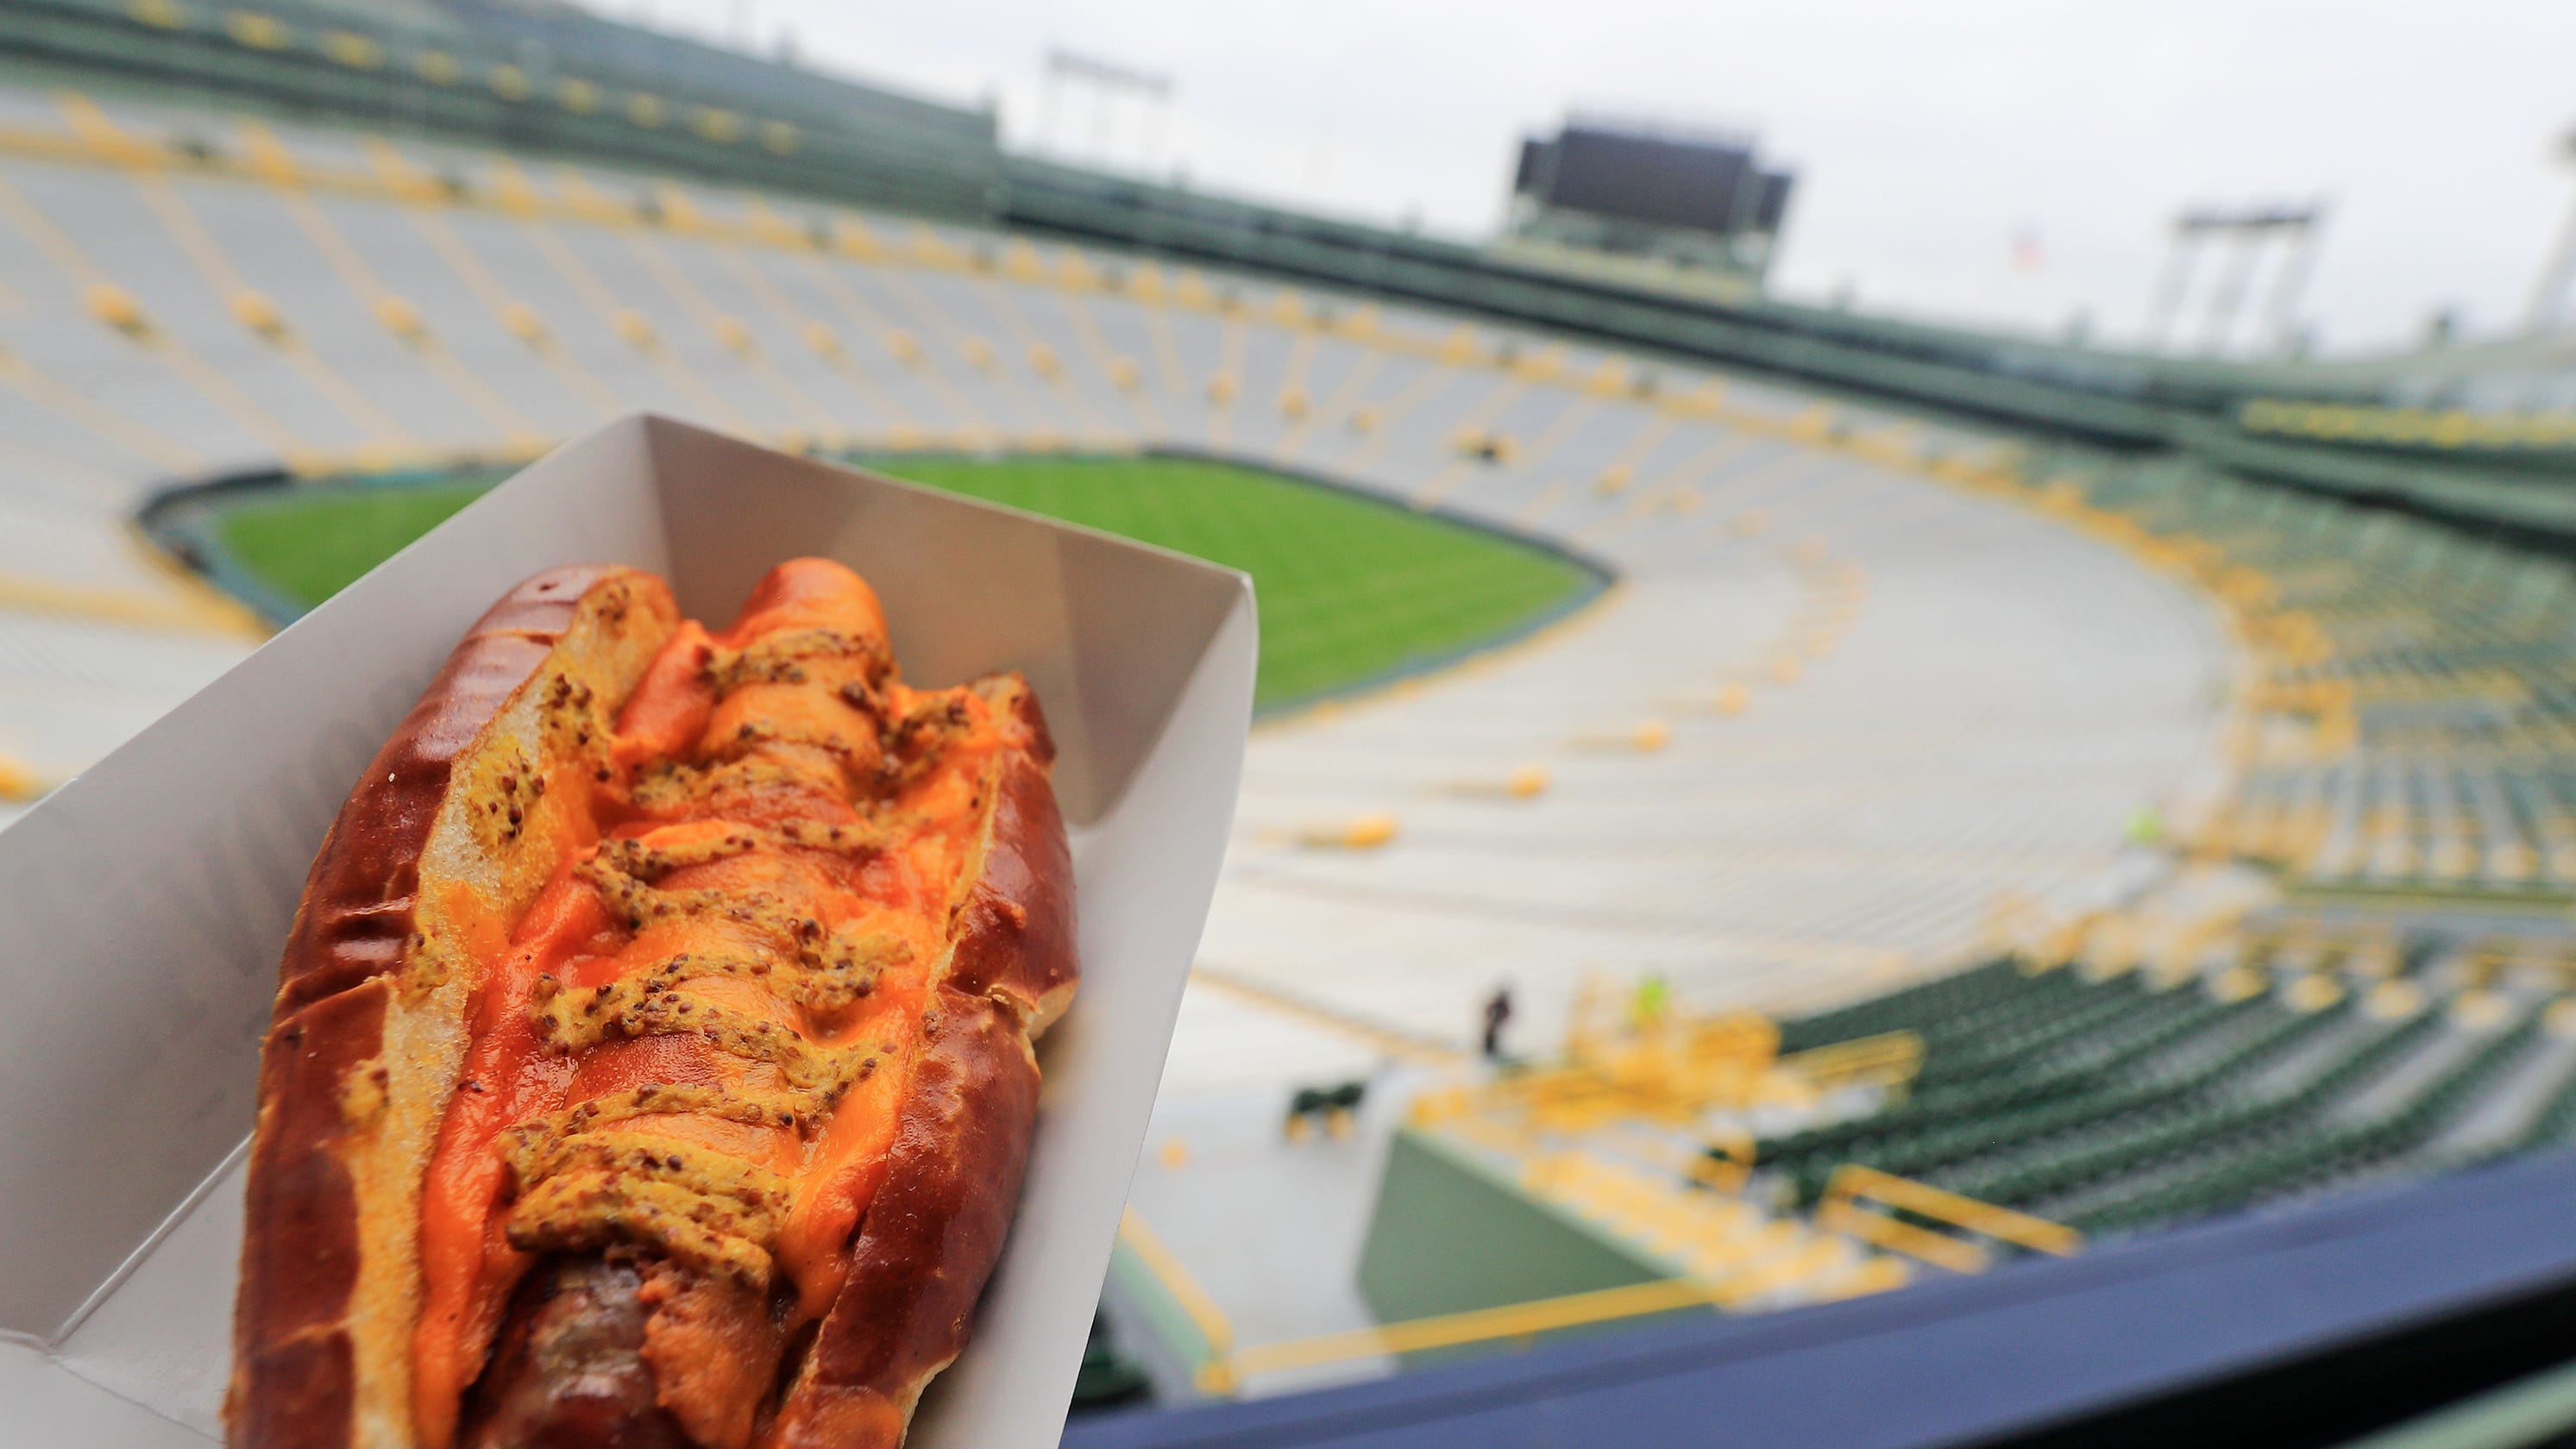 Packers new Lambeau Field foods led by brat topped by curds